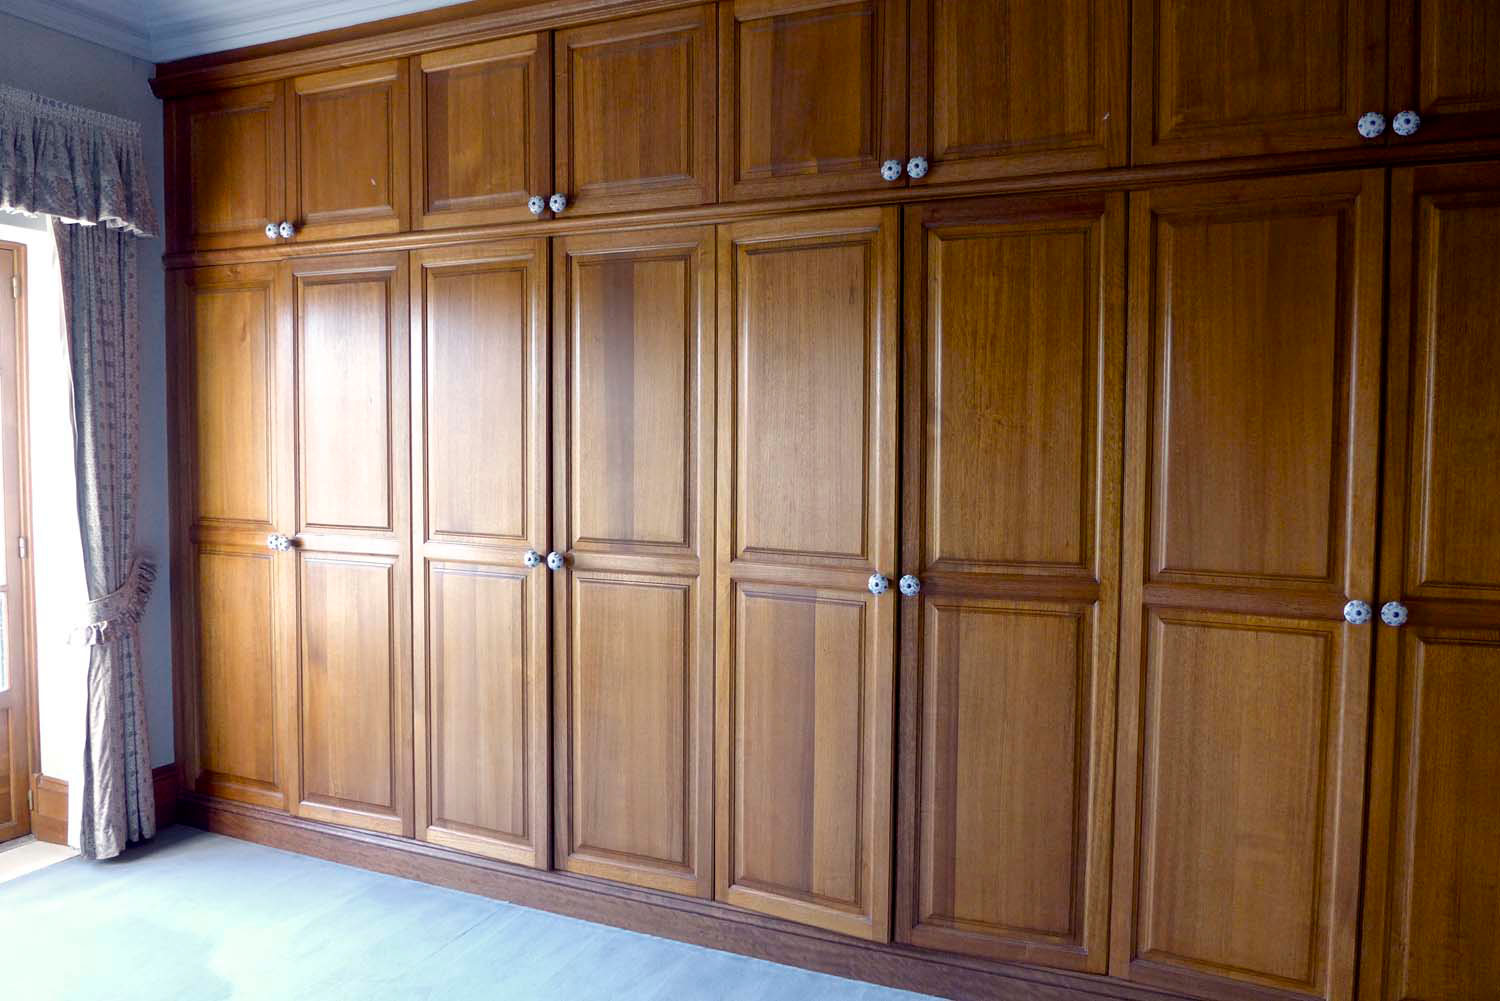 9 Timber wardrobe custom made with quality timber and quality craftsmanship